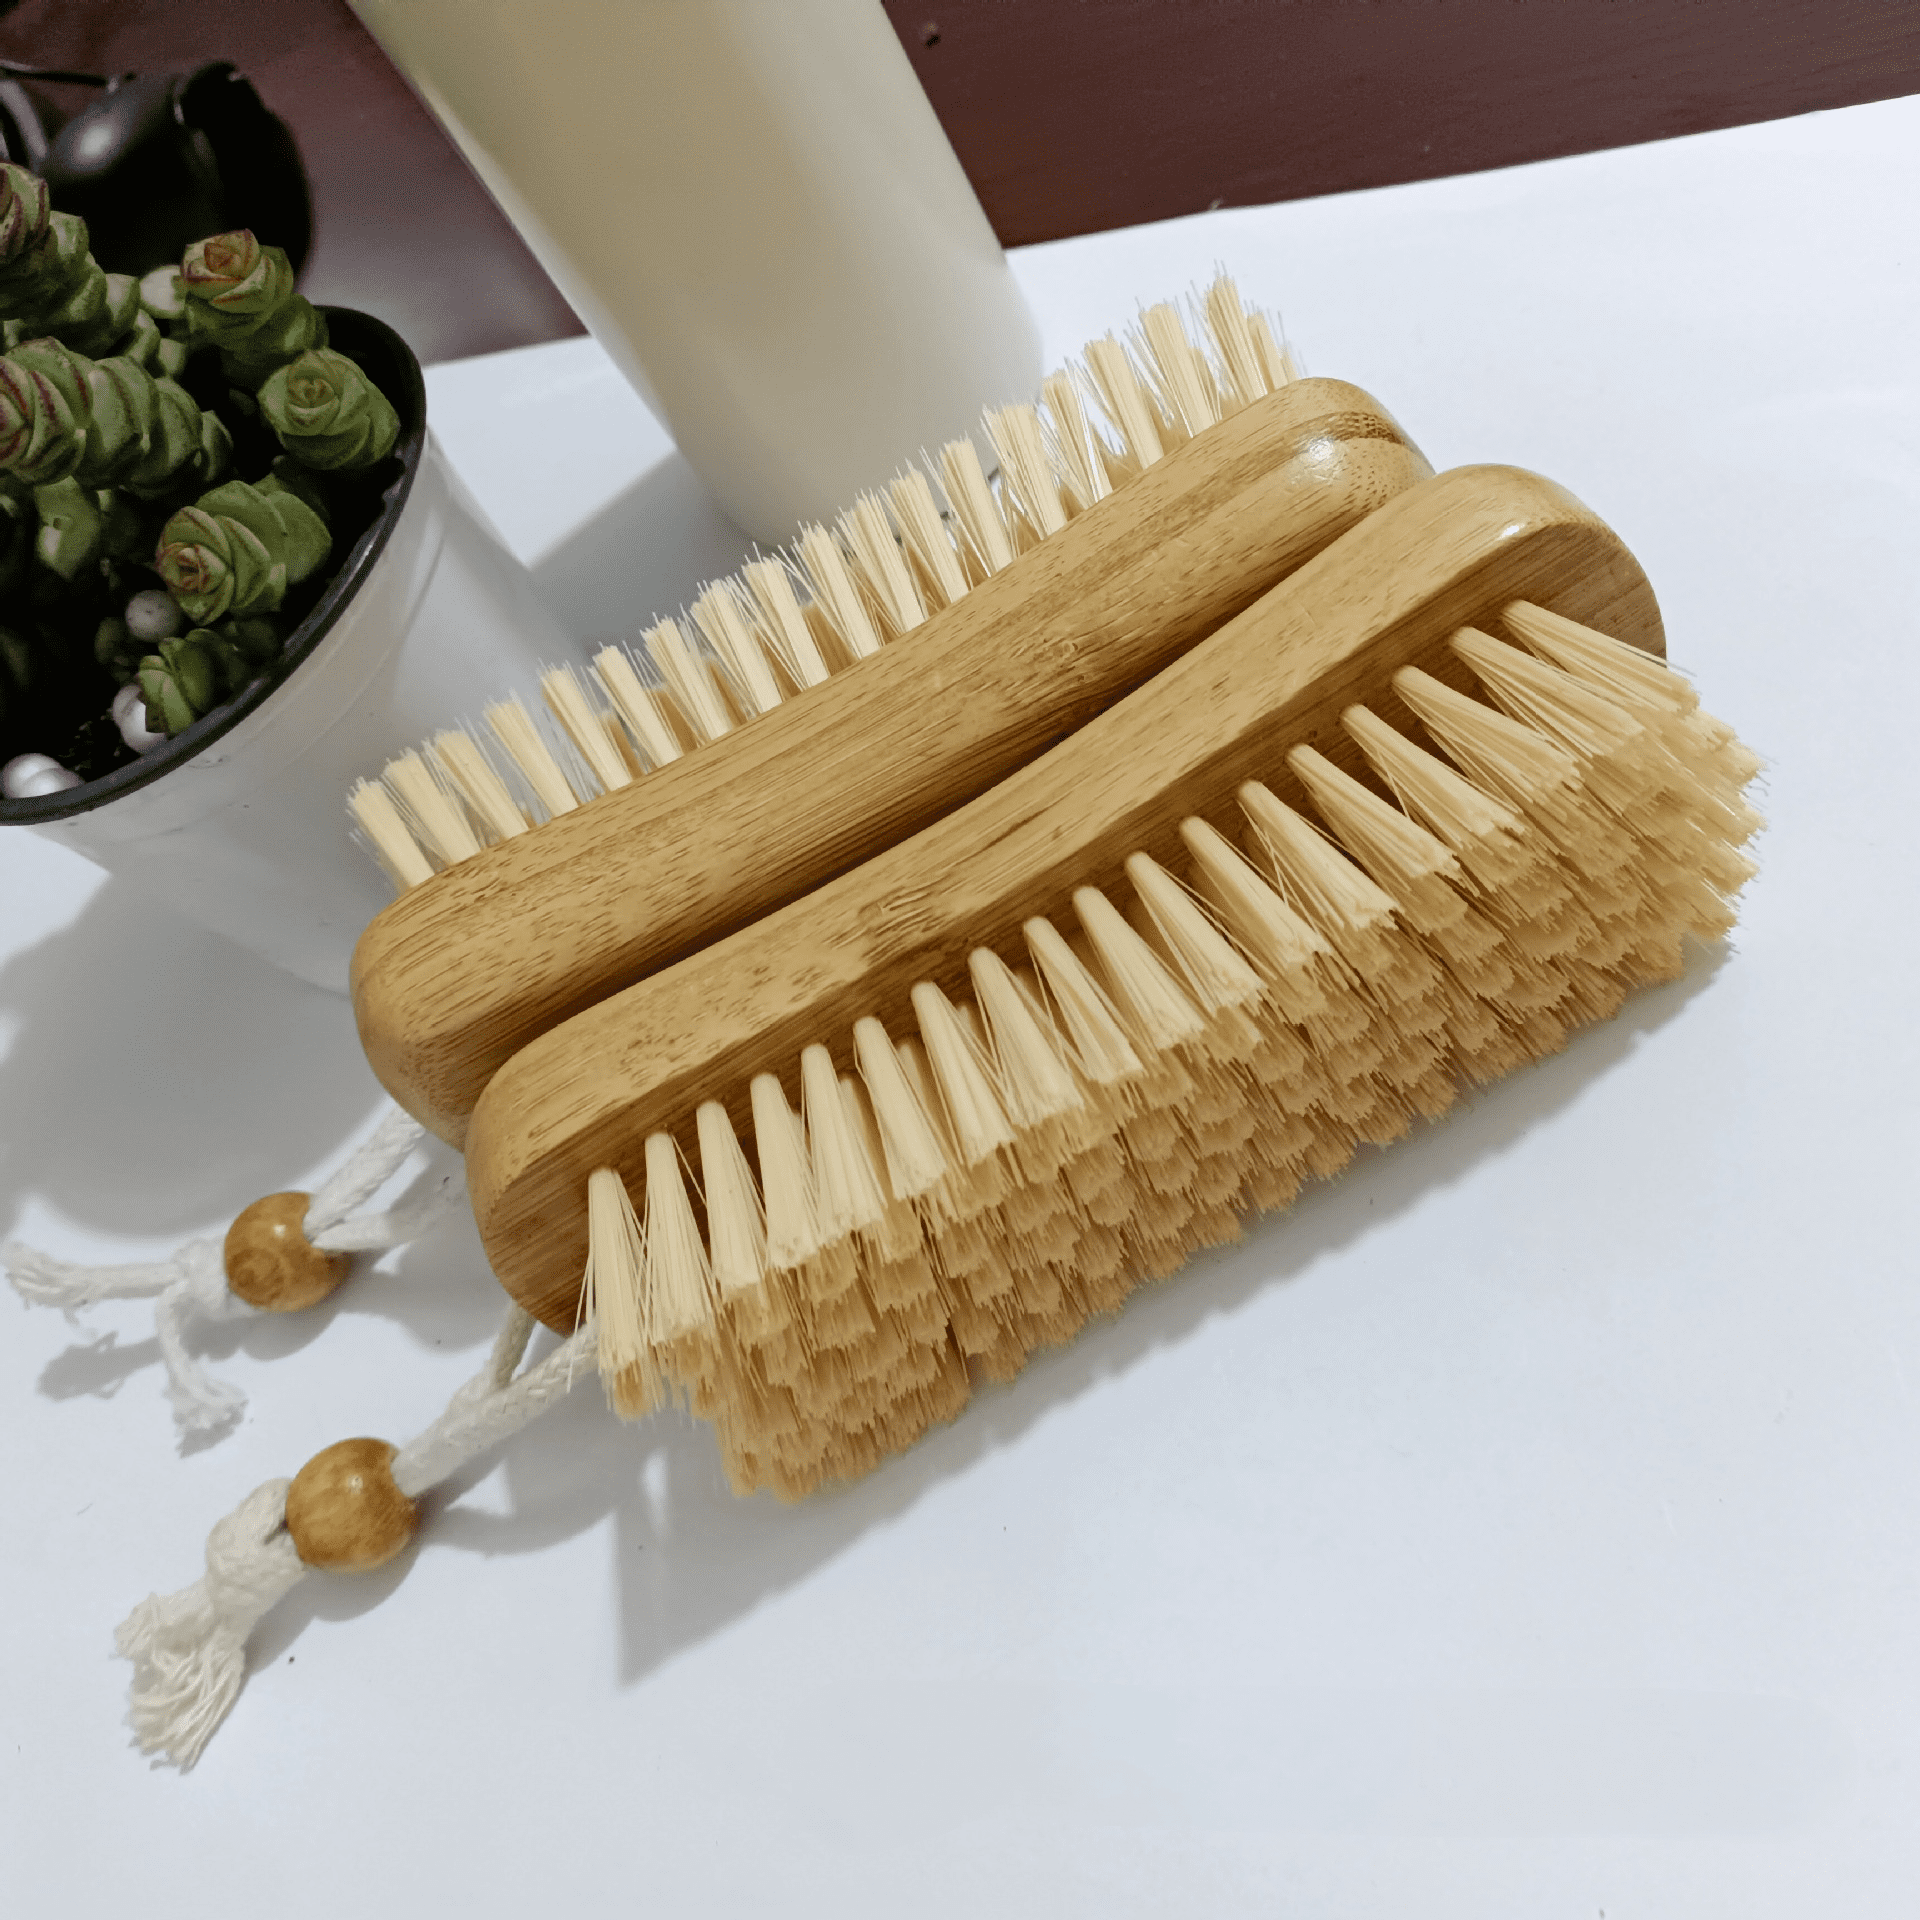 Rush （color：white Household does not hurt shoes soft shoe brush  multi-functional household products shoe washing brush soft brush cleaning  brush S5413 